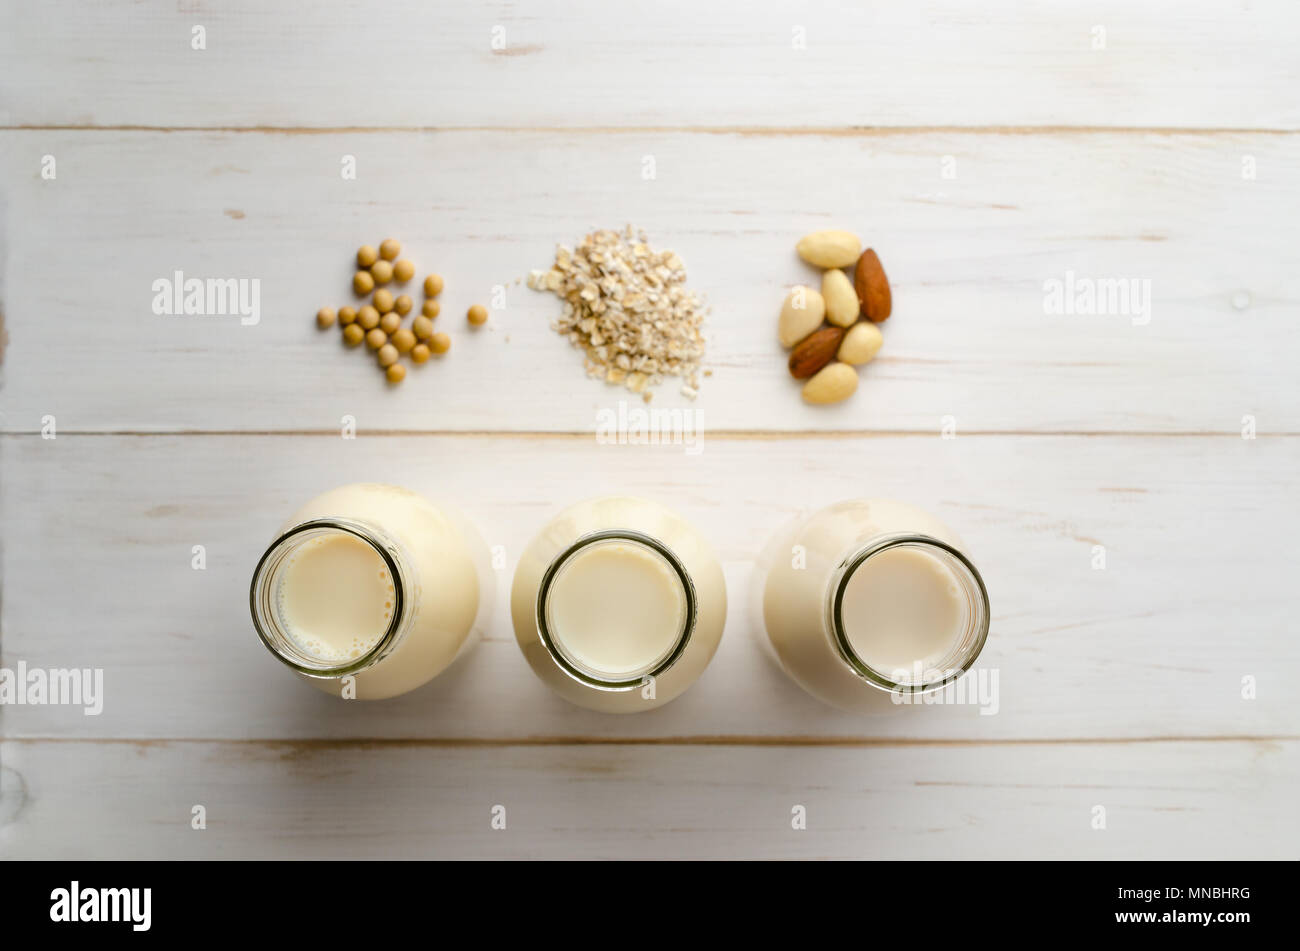 Overhead shot of soya, oat and almond milk drinks in a row of open bottles with ingredients on painted white, wood planked table. Shallow depth of fie Stock Photo